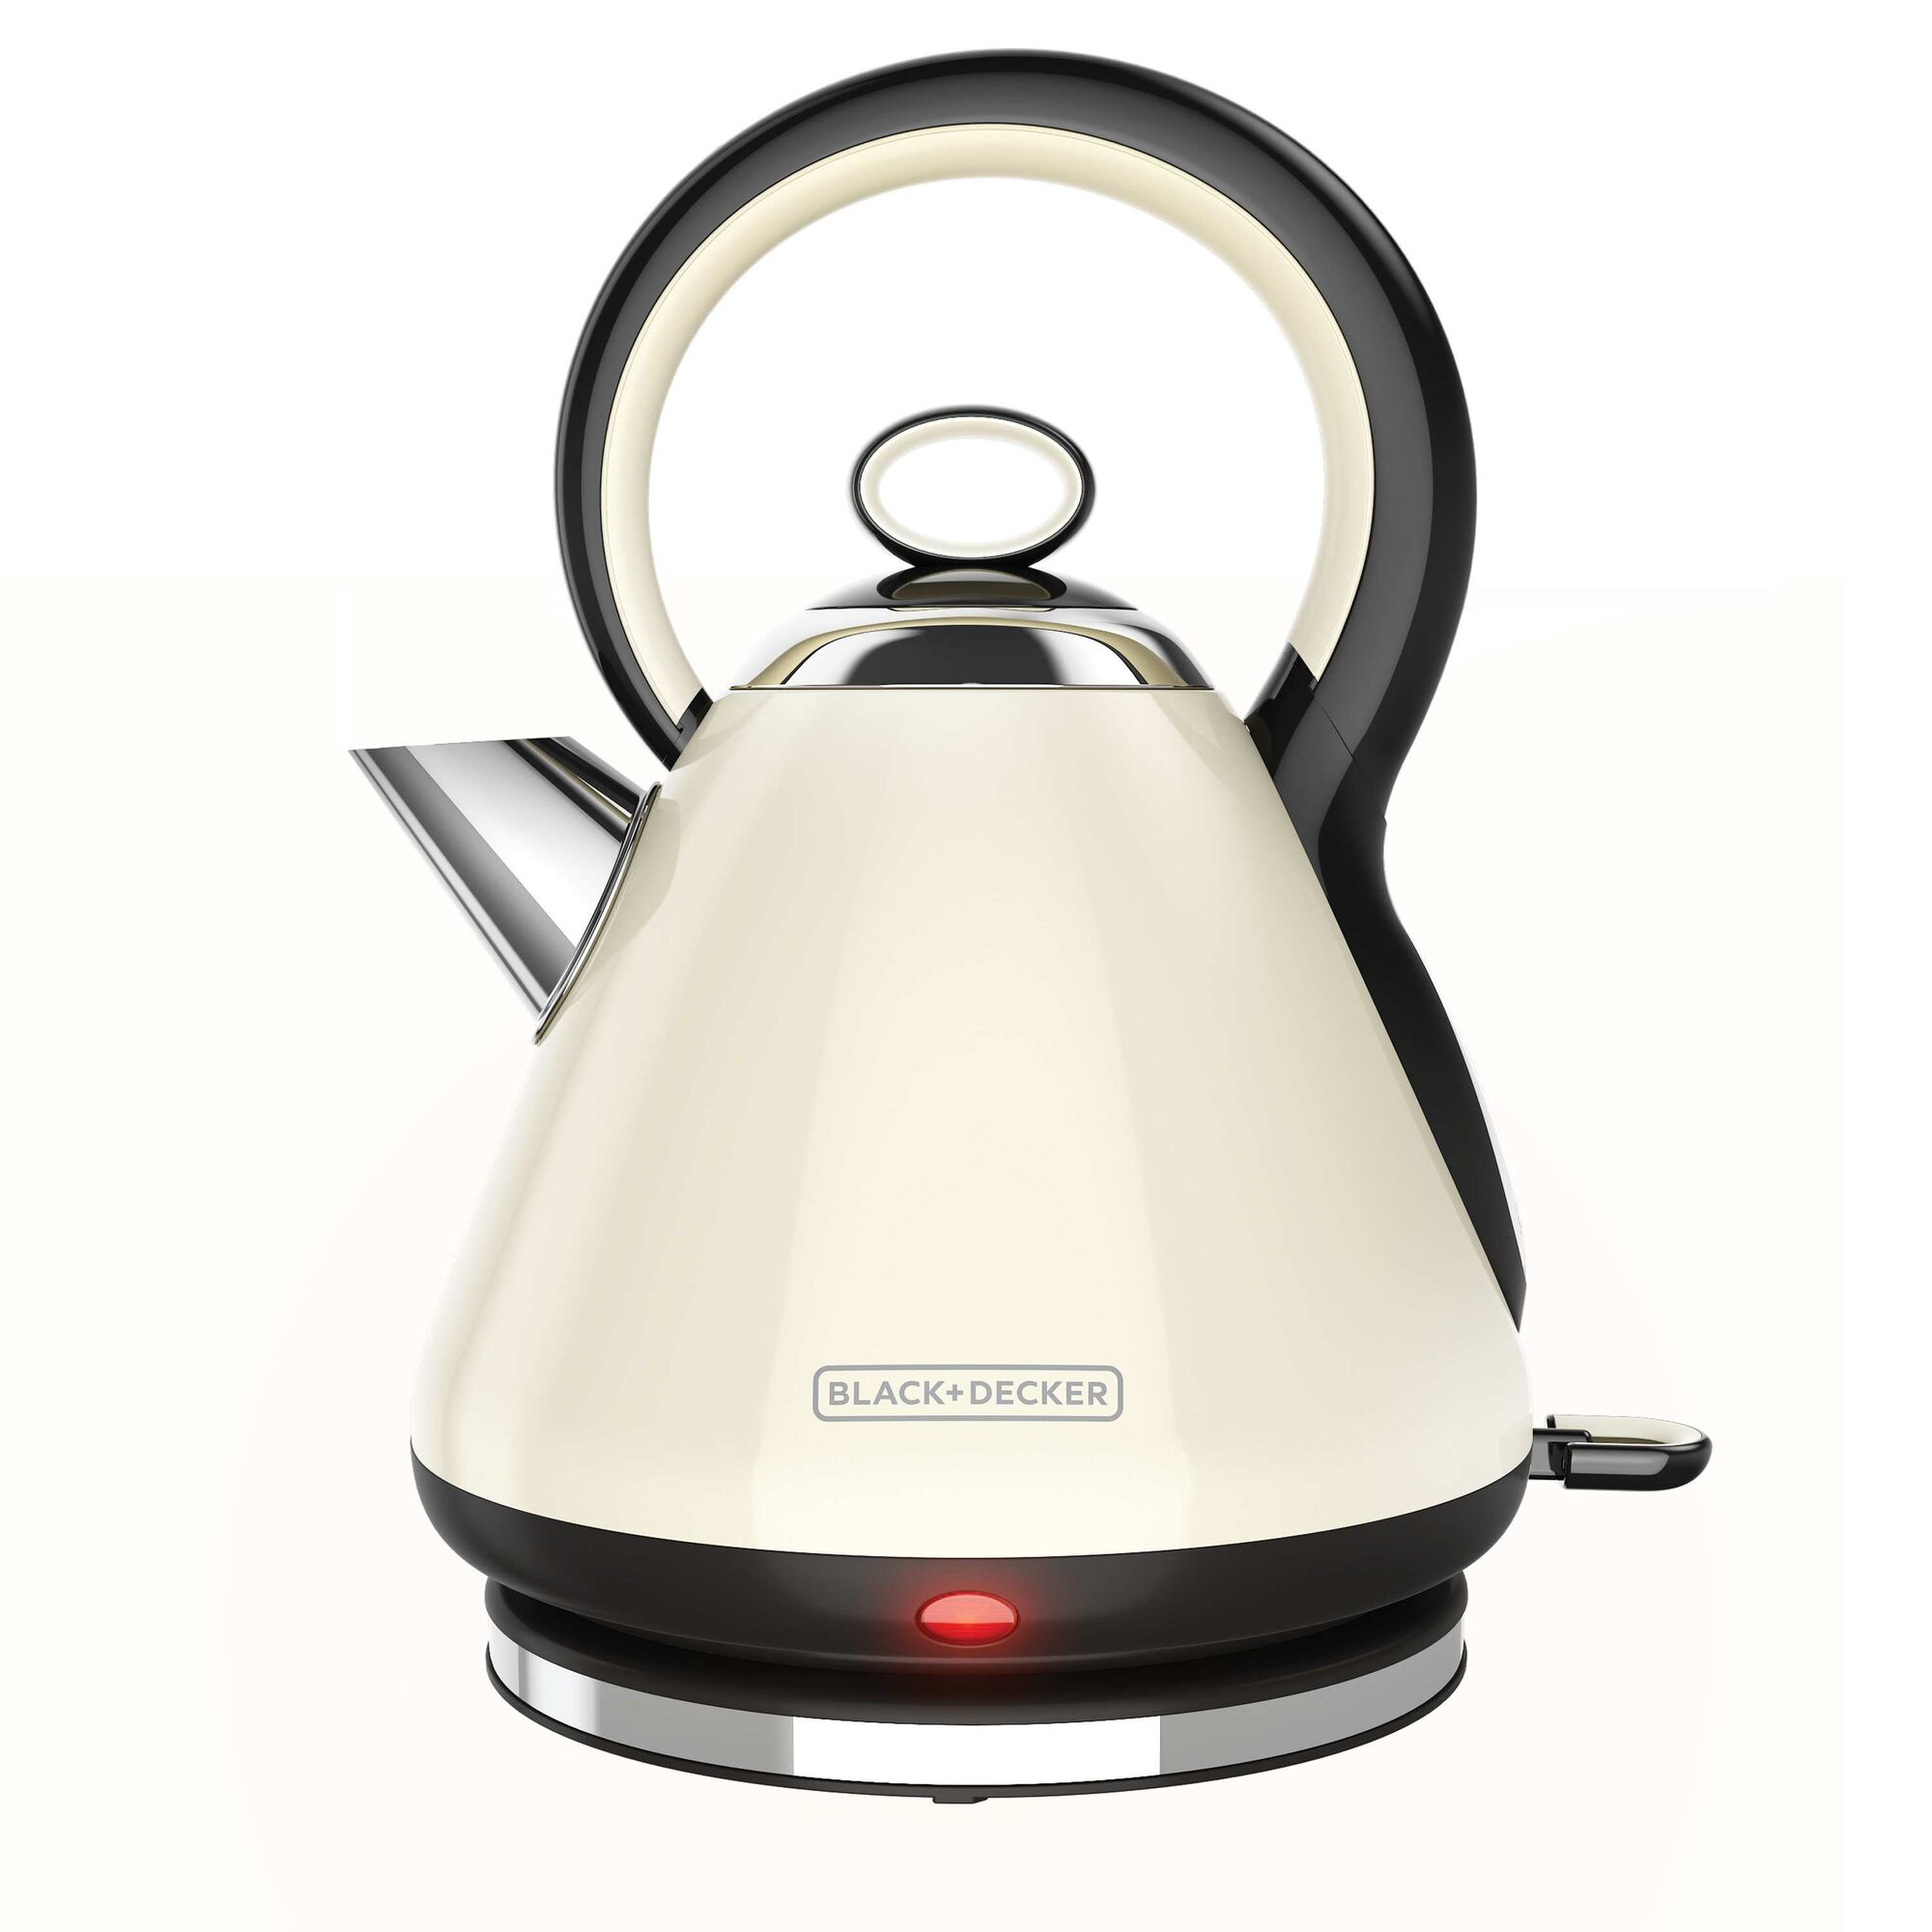 Profile of Stainless Steel Electric Cordless Kettle.